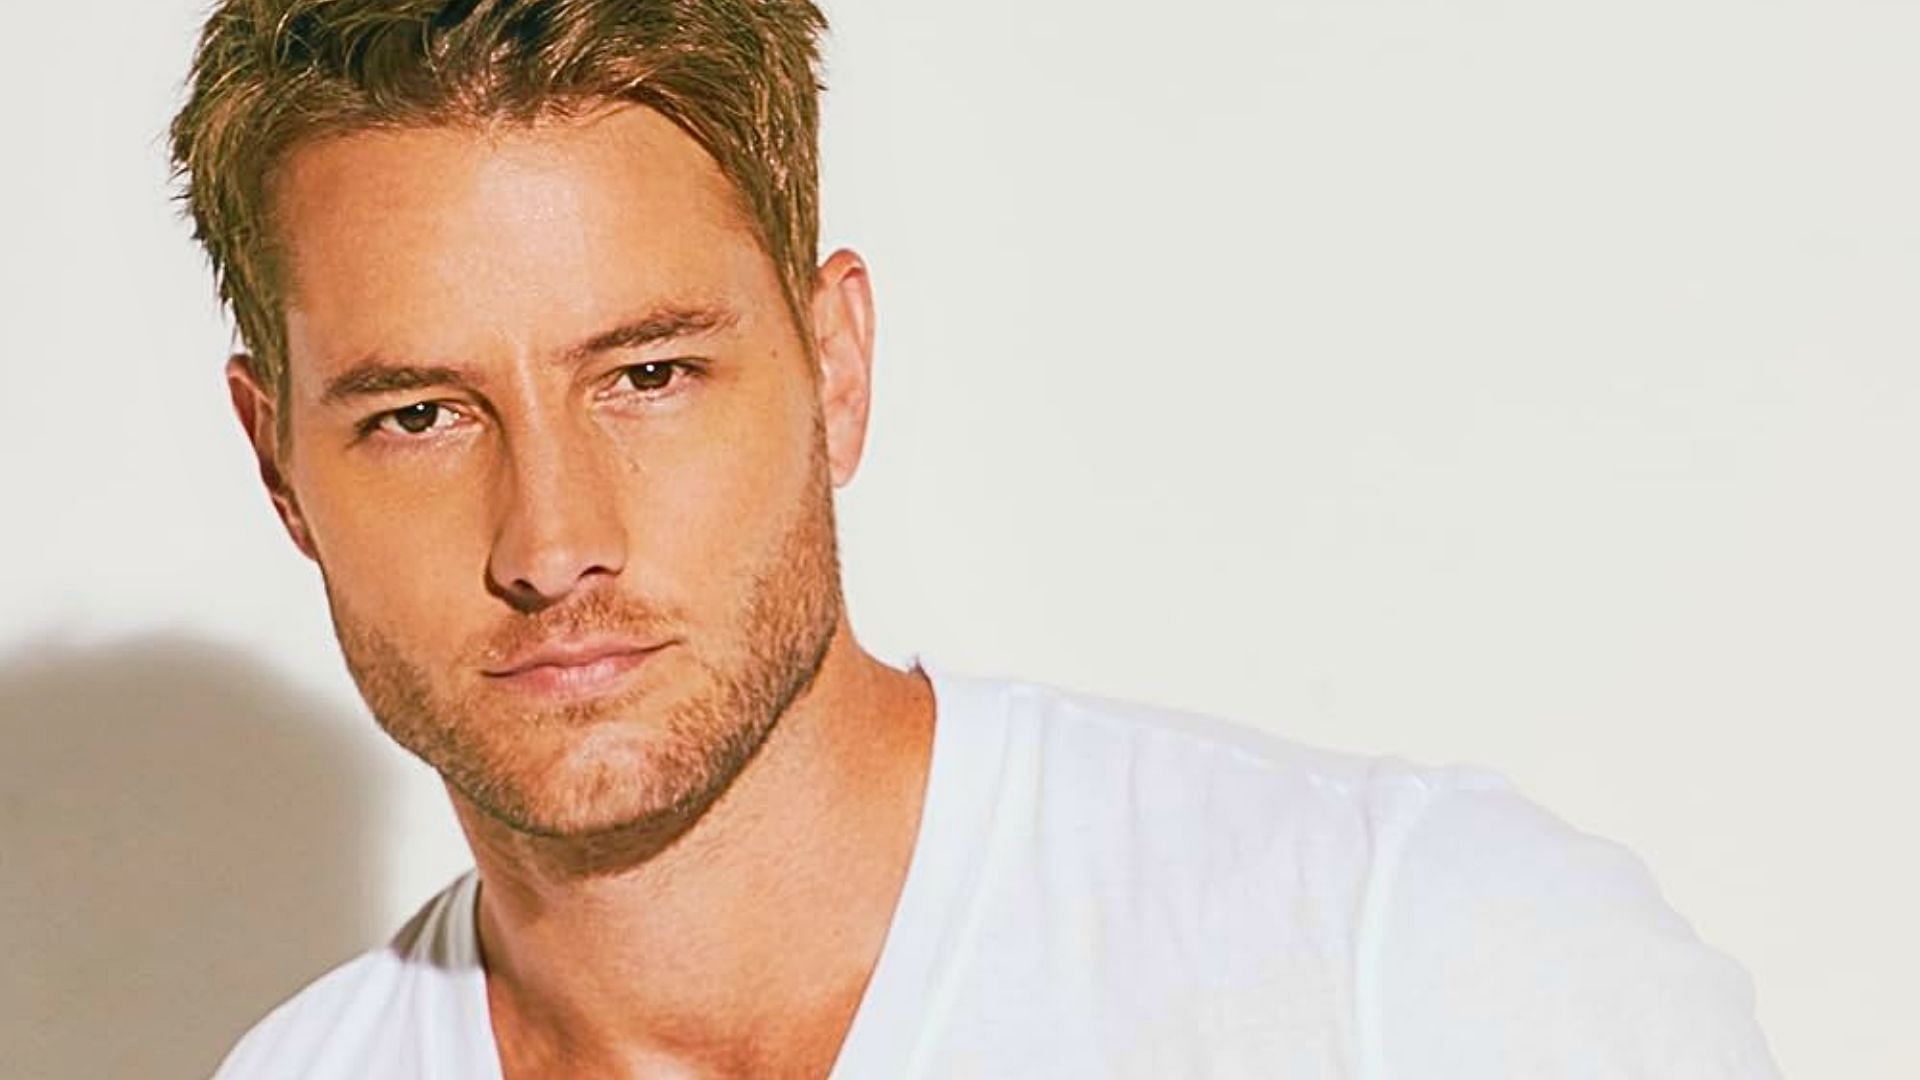 Justin Hartley was on The Young and the Restless from November 2014-2016 (Image via Riker Brothers)